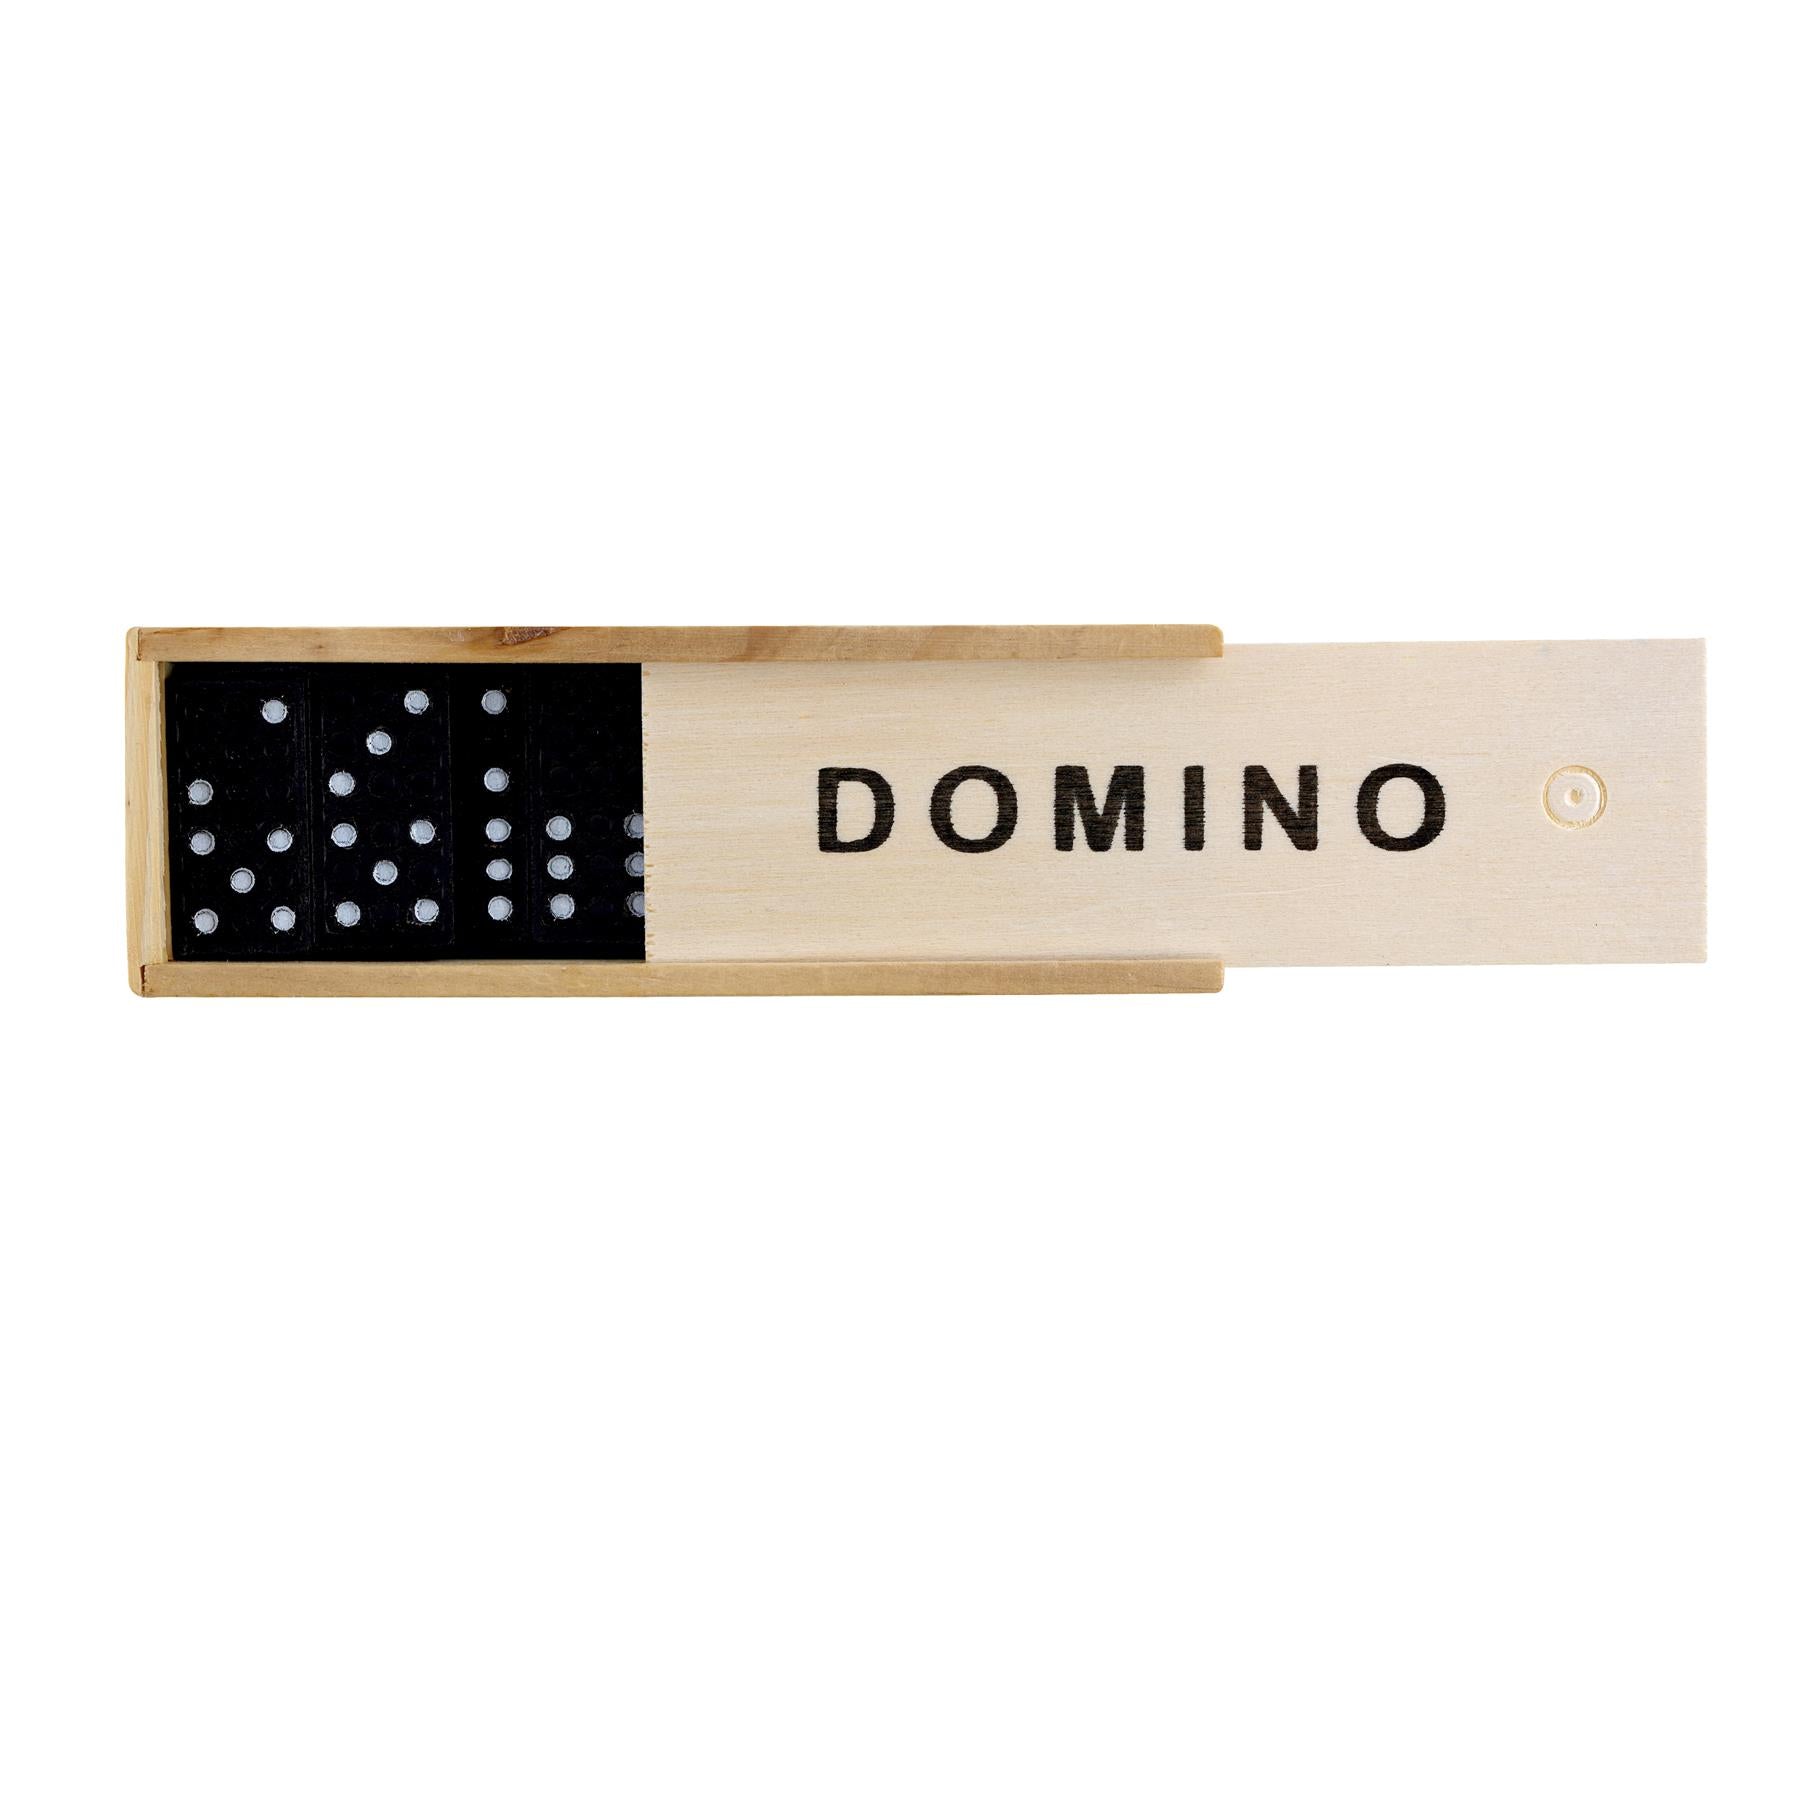 The Magic Toy Shop Dominoes Game Dominoes Game in Wooden Box